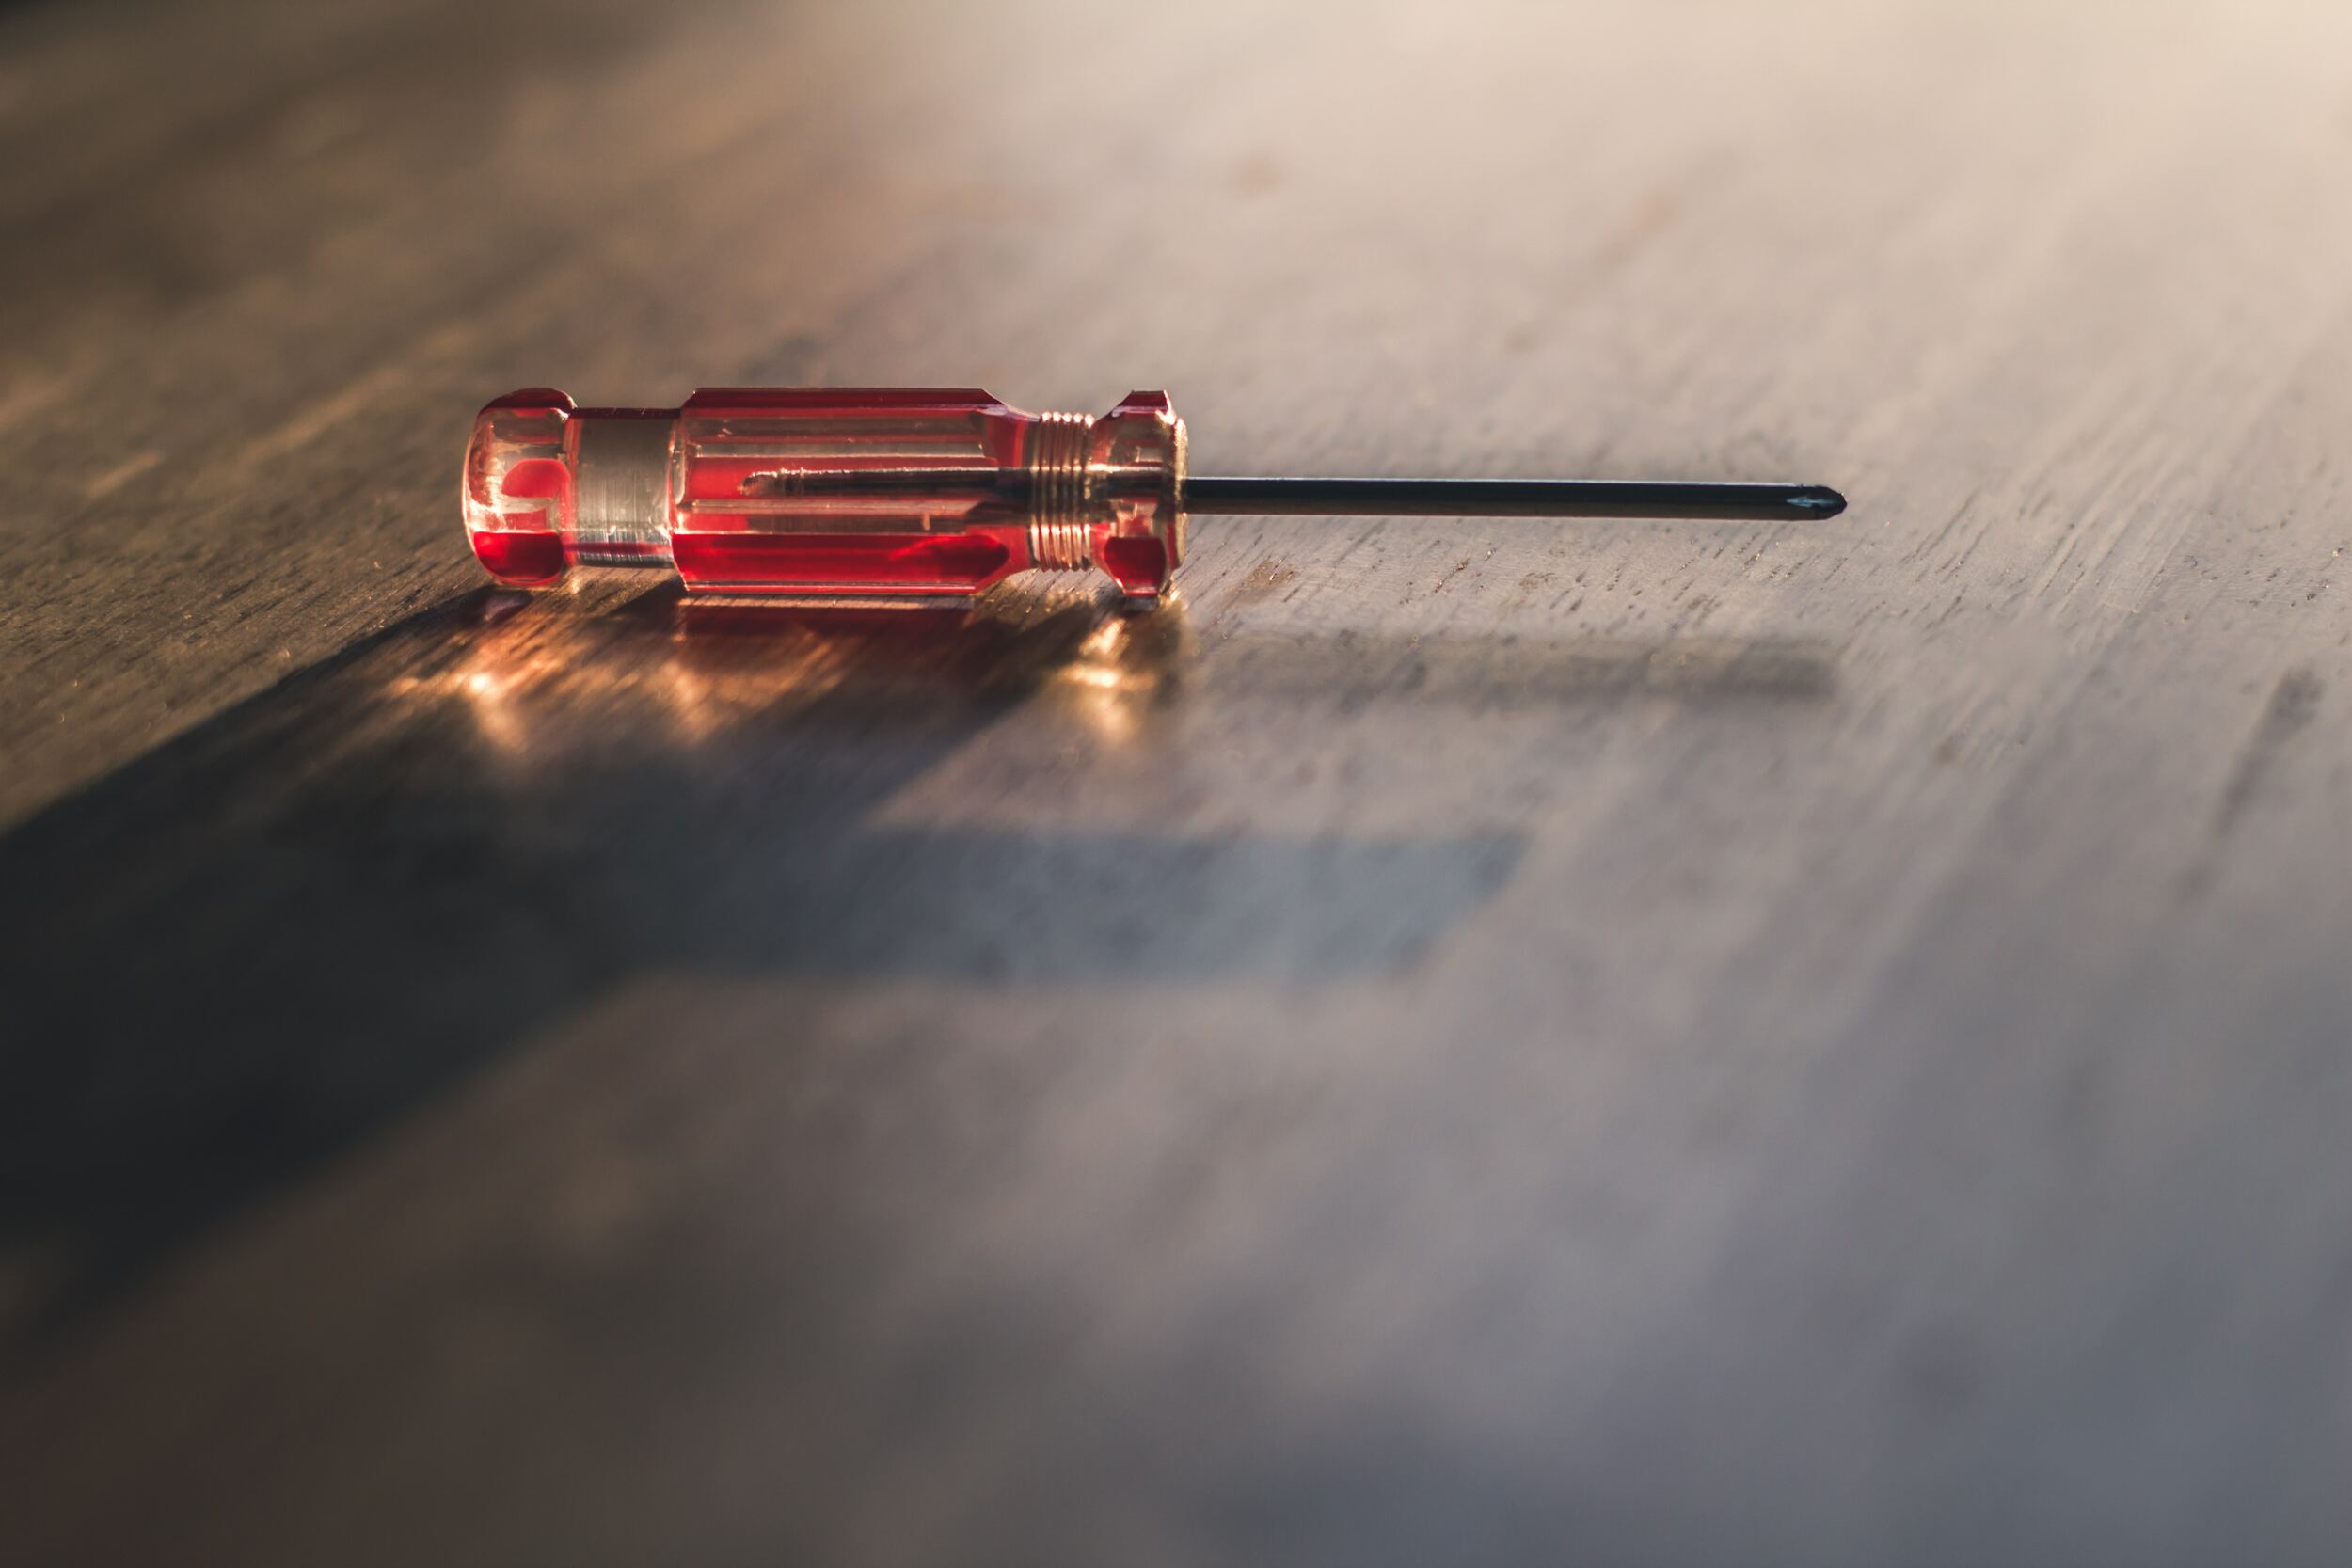 A screwdriver on a wooden surface.